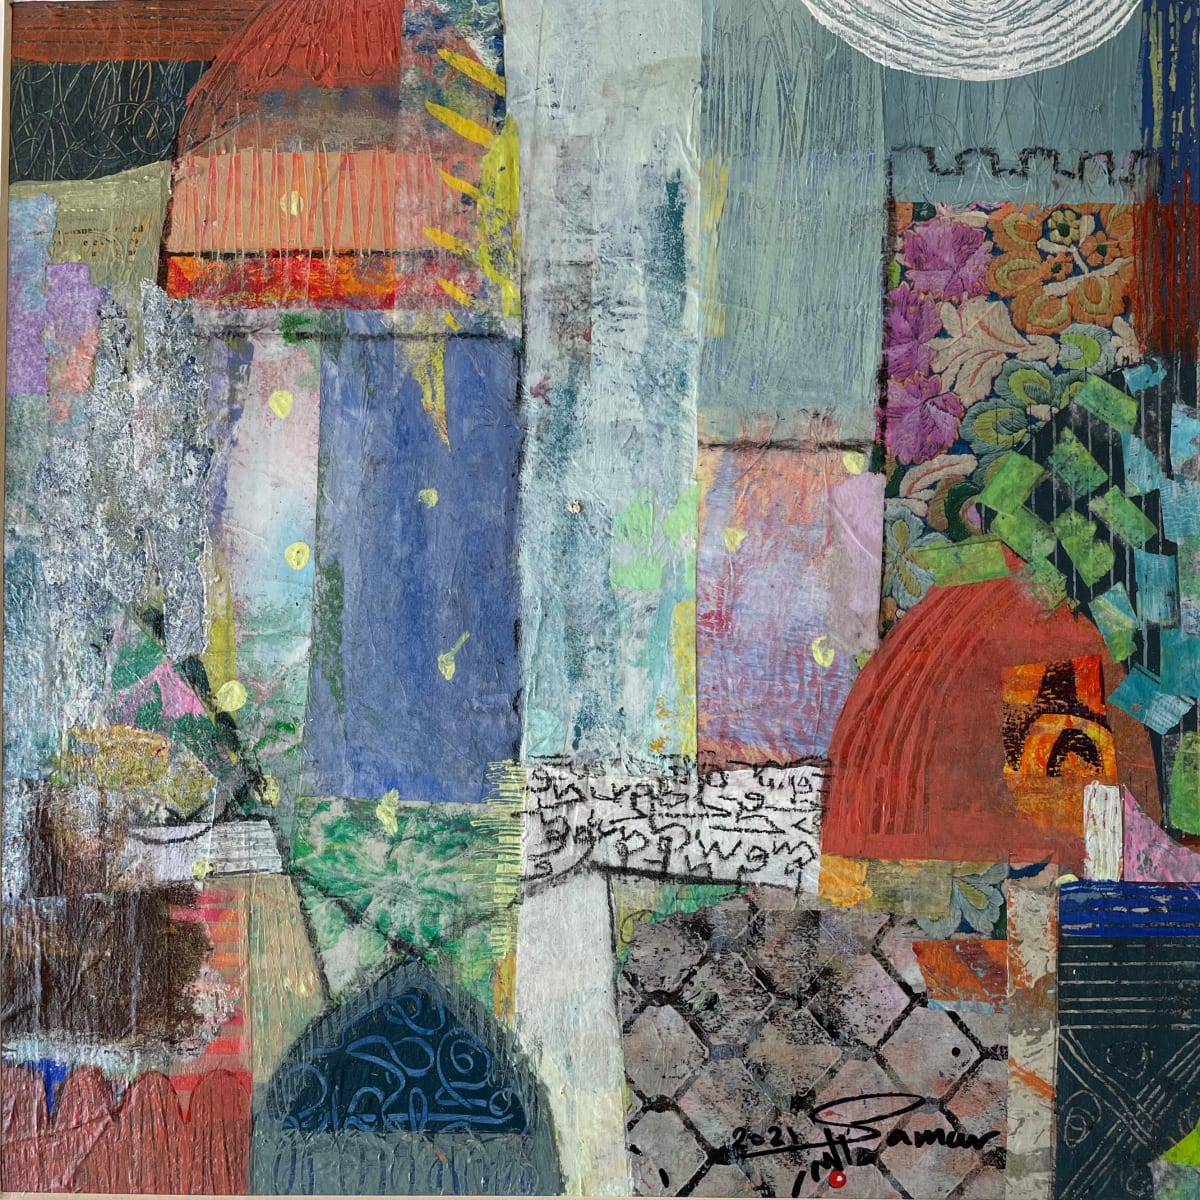 Oriental Glimpses - 454 by Samar Albader  Image: Mixed Media painting, with White Matt Board.
Framed Size:   45x45cm
Painting size : 30x30cm
Ready to Hang